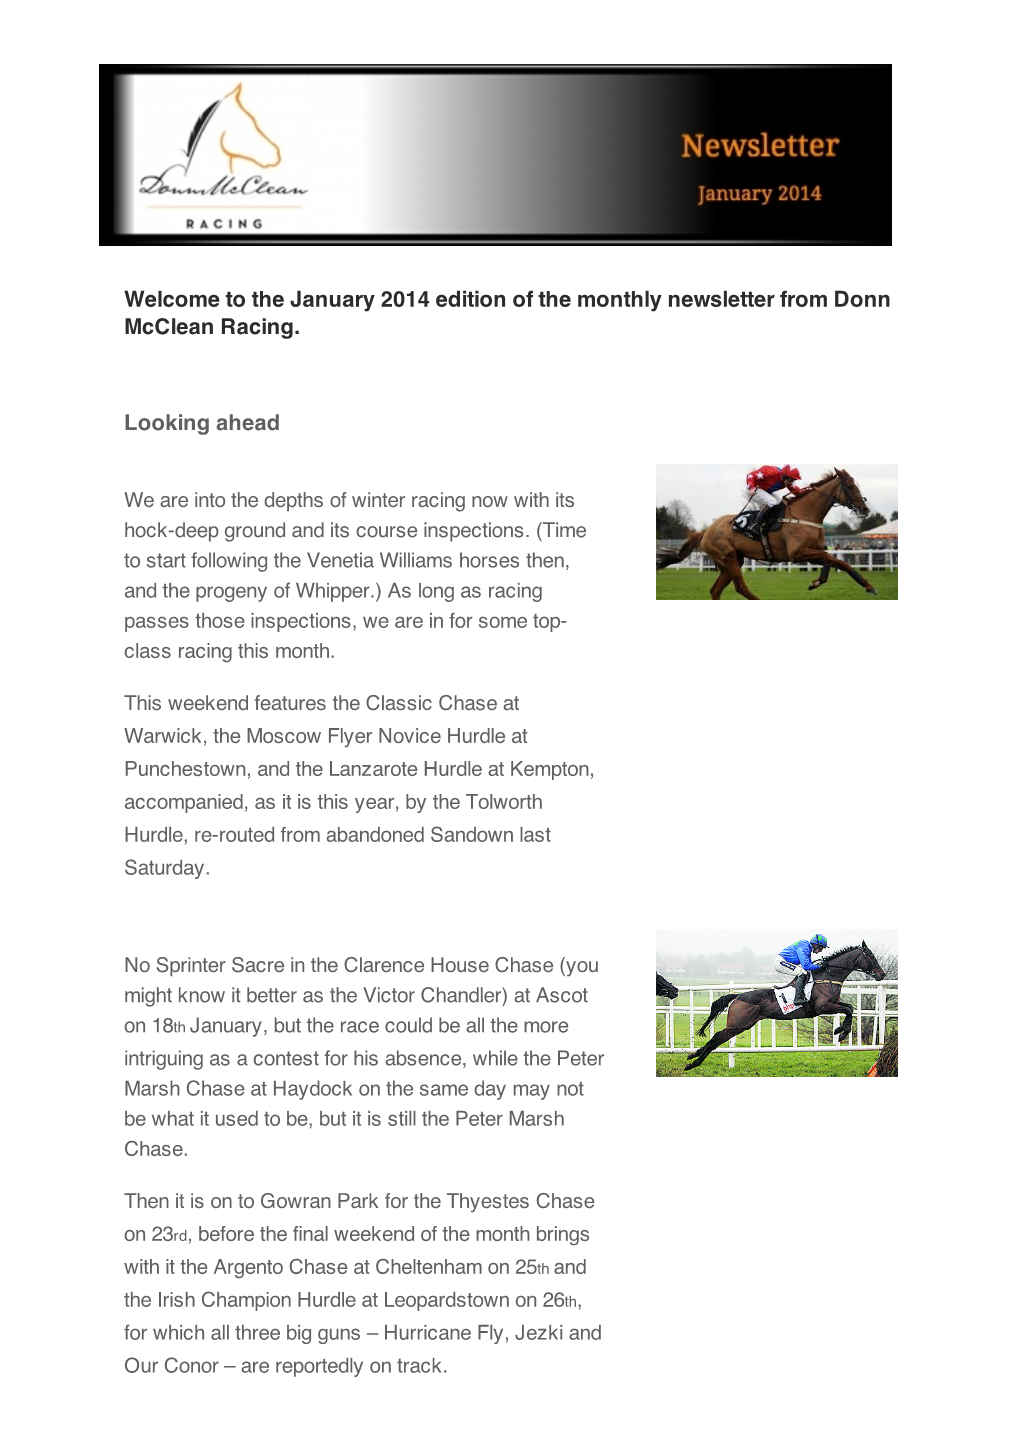 January 2014 Edition of the Monthly Newsletter from Donn Mcclean Racing